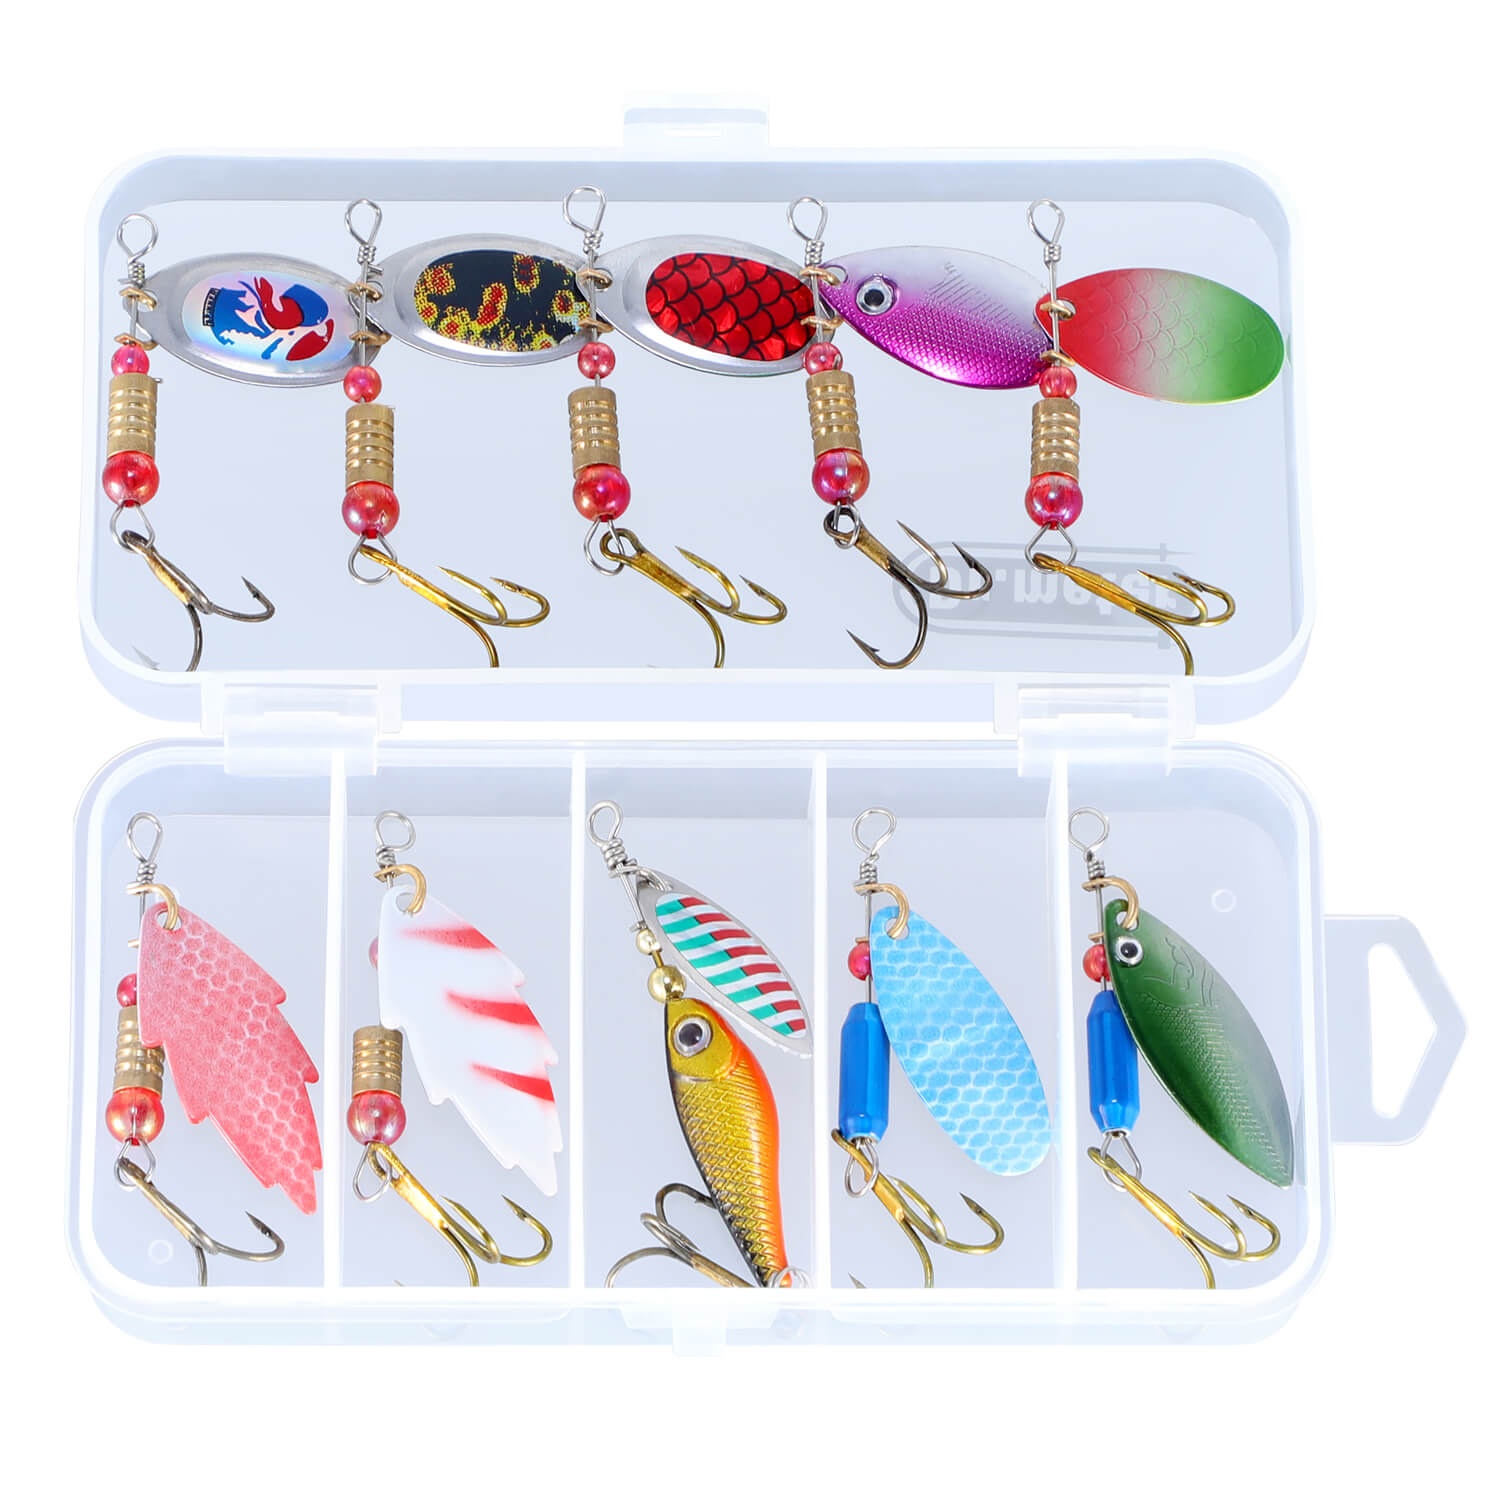 Dr.Fish 30 Pack Fishing Spinner Baits Kit, 2 Tackle Boxes with